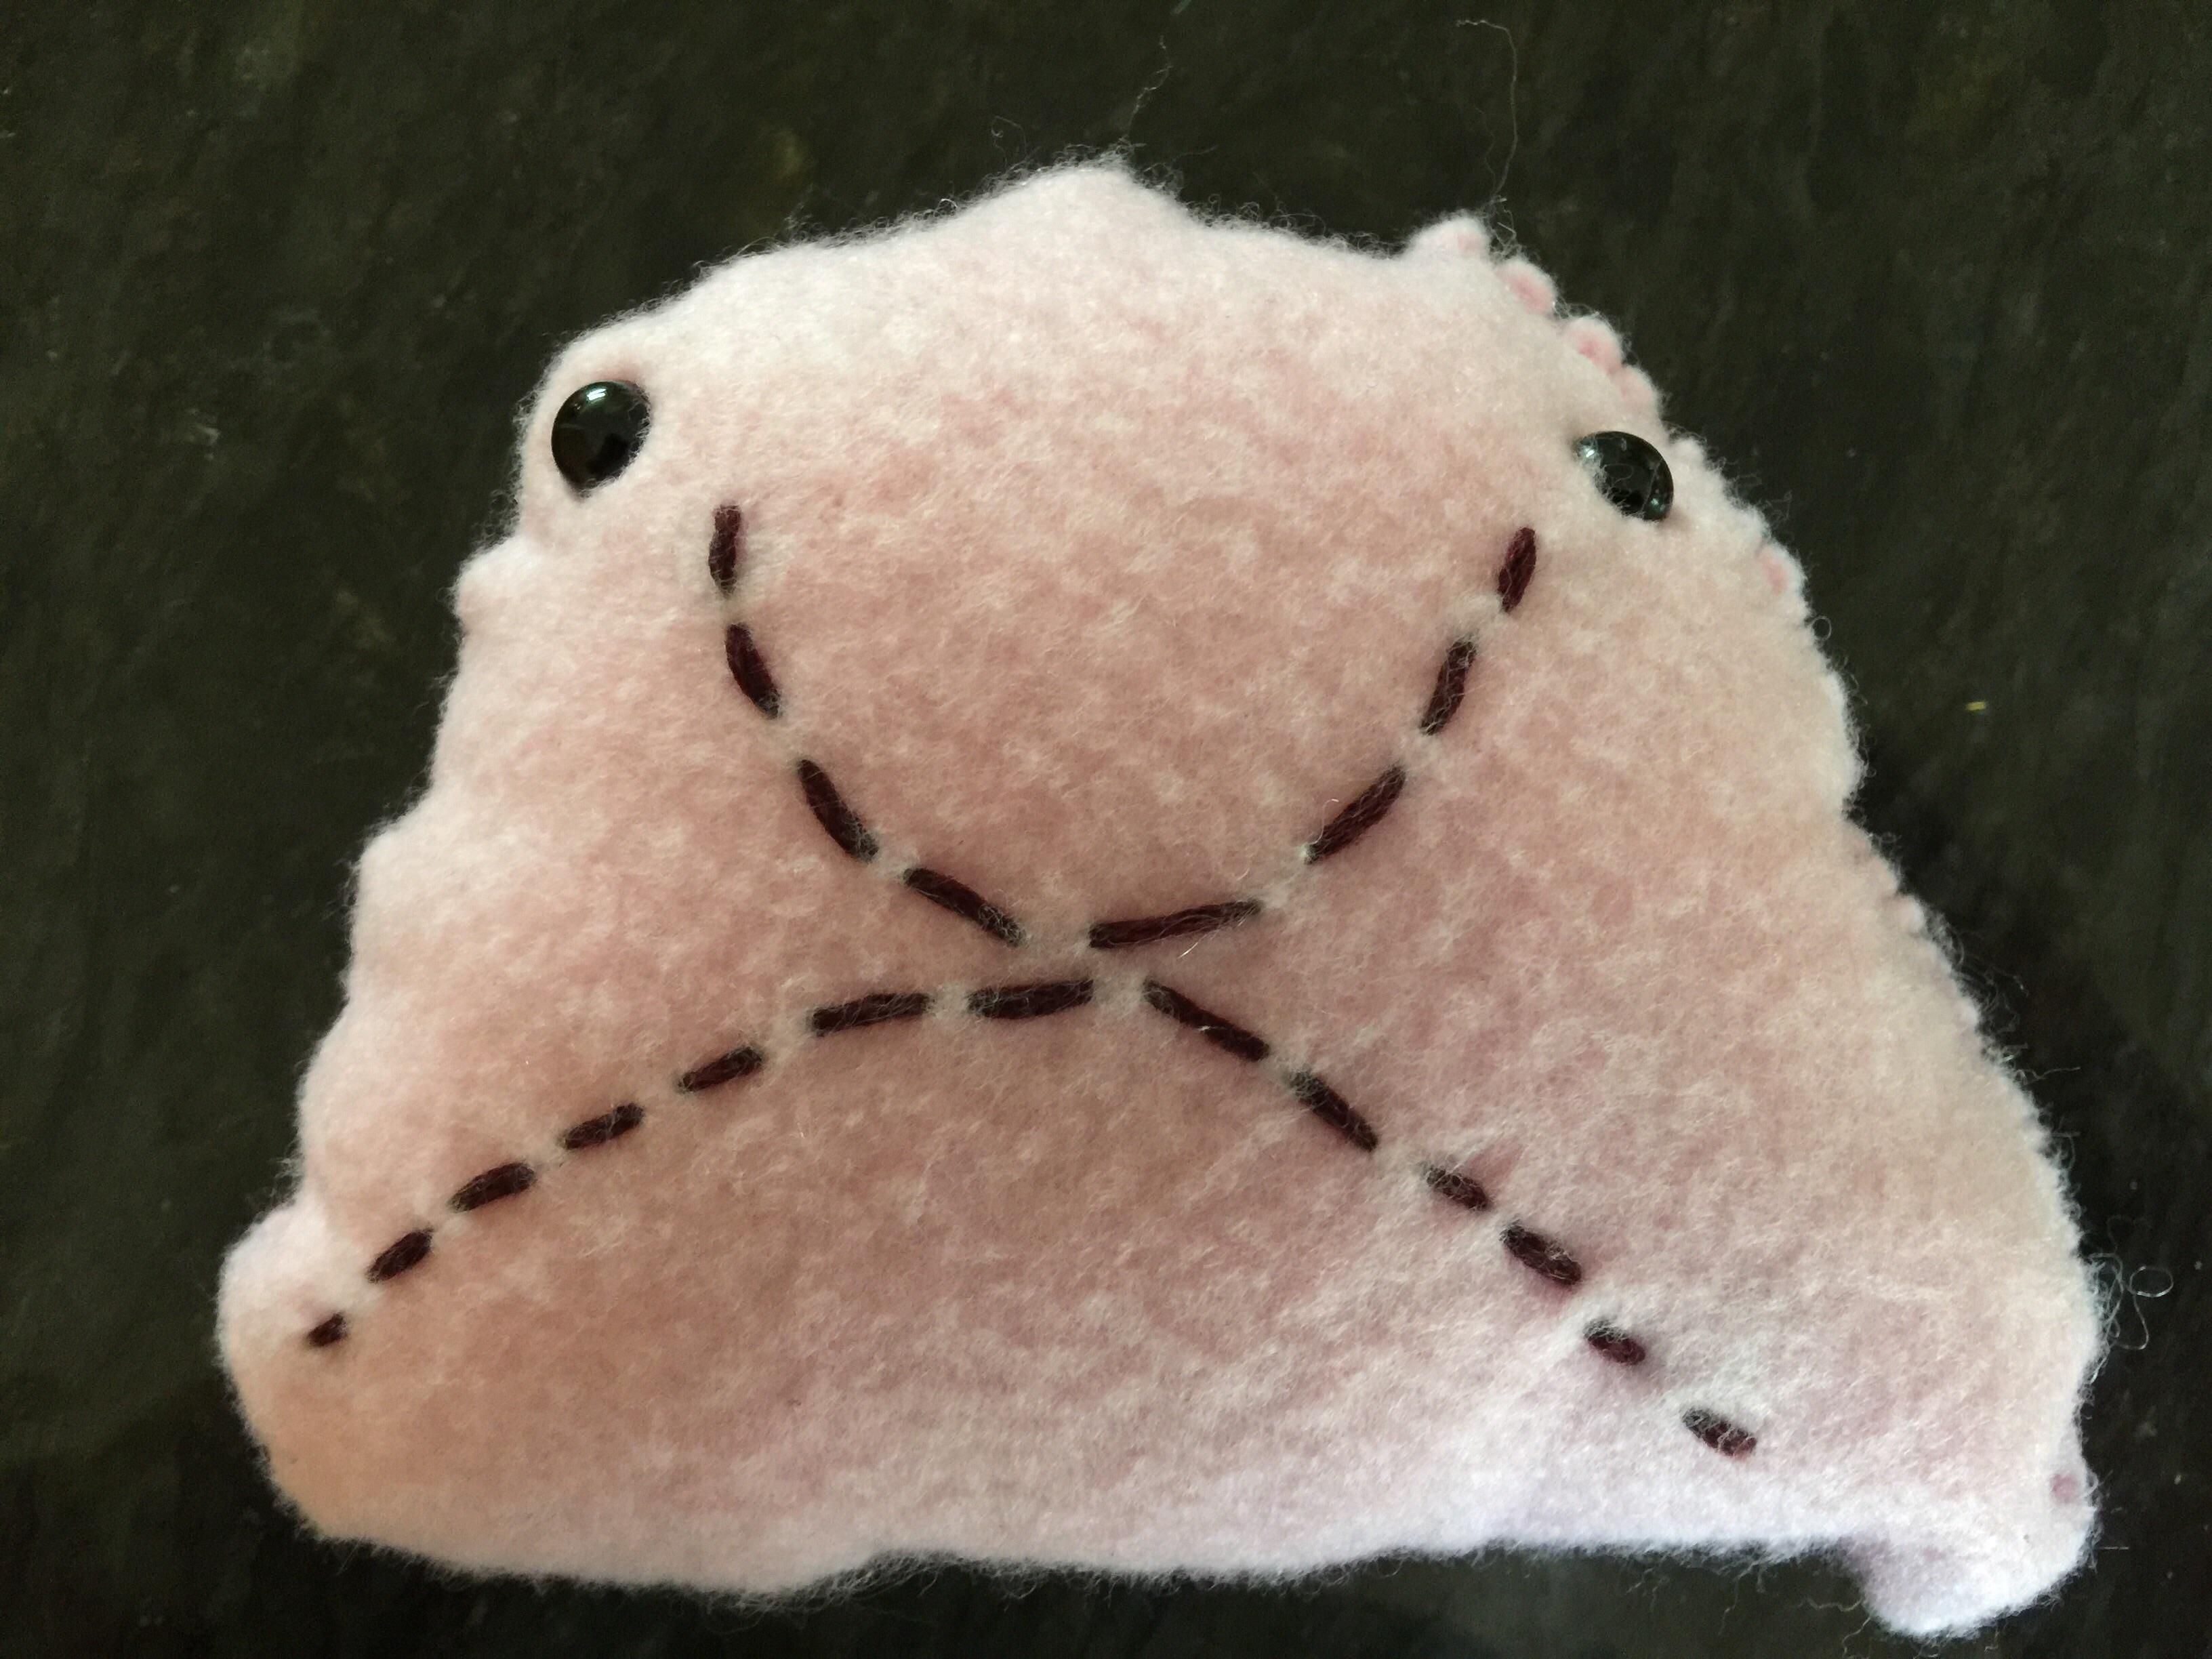 My kid made a blobfish as a school sewing project.